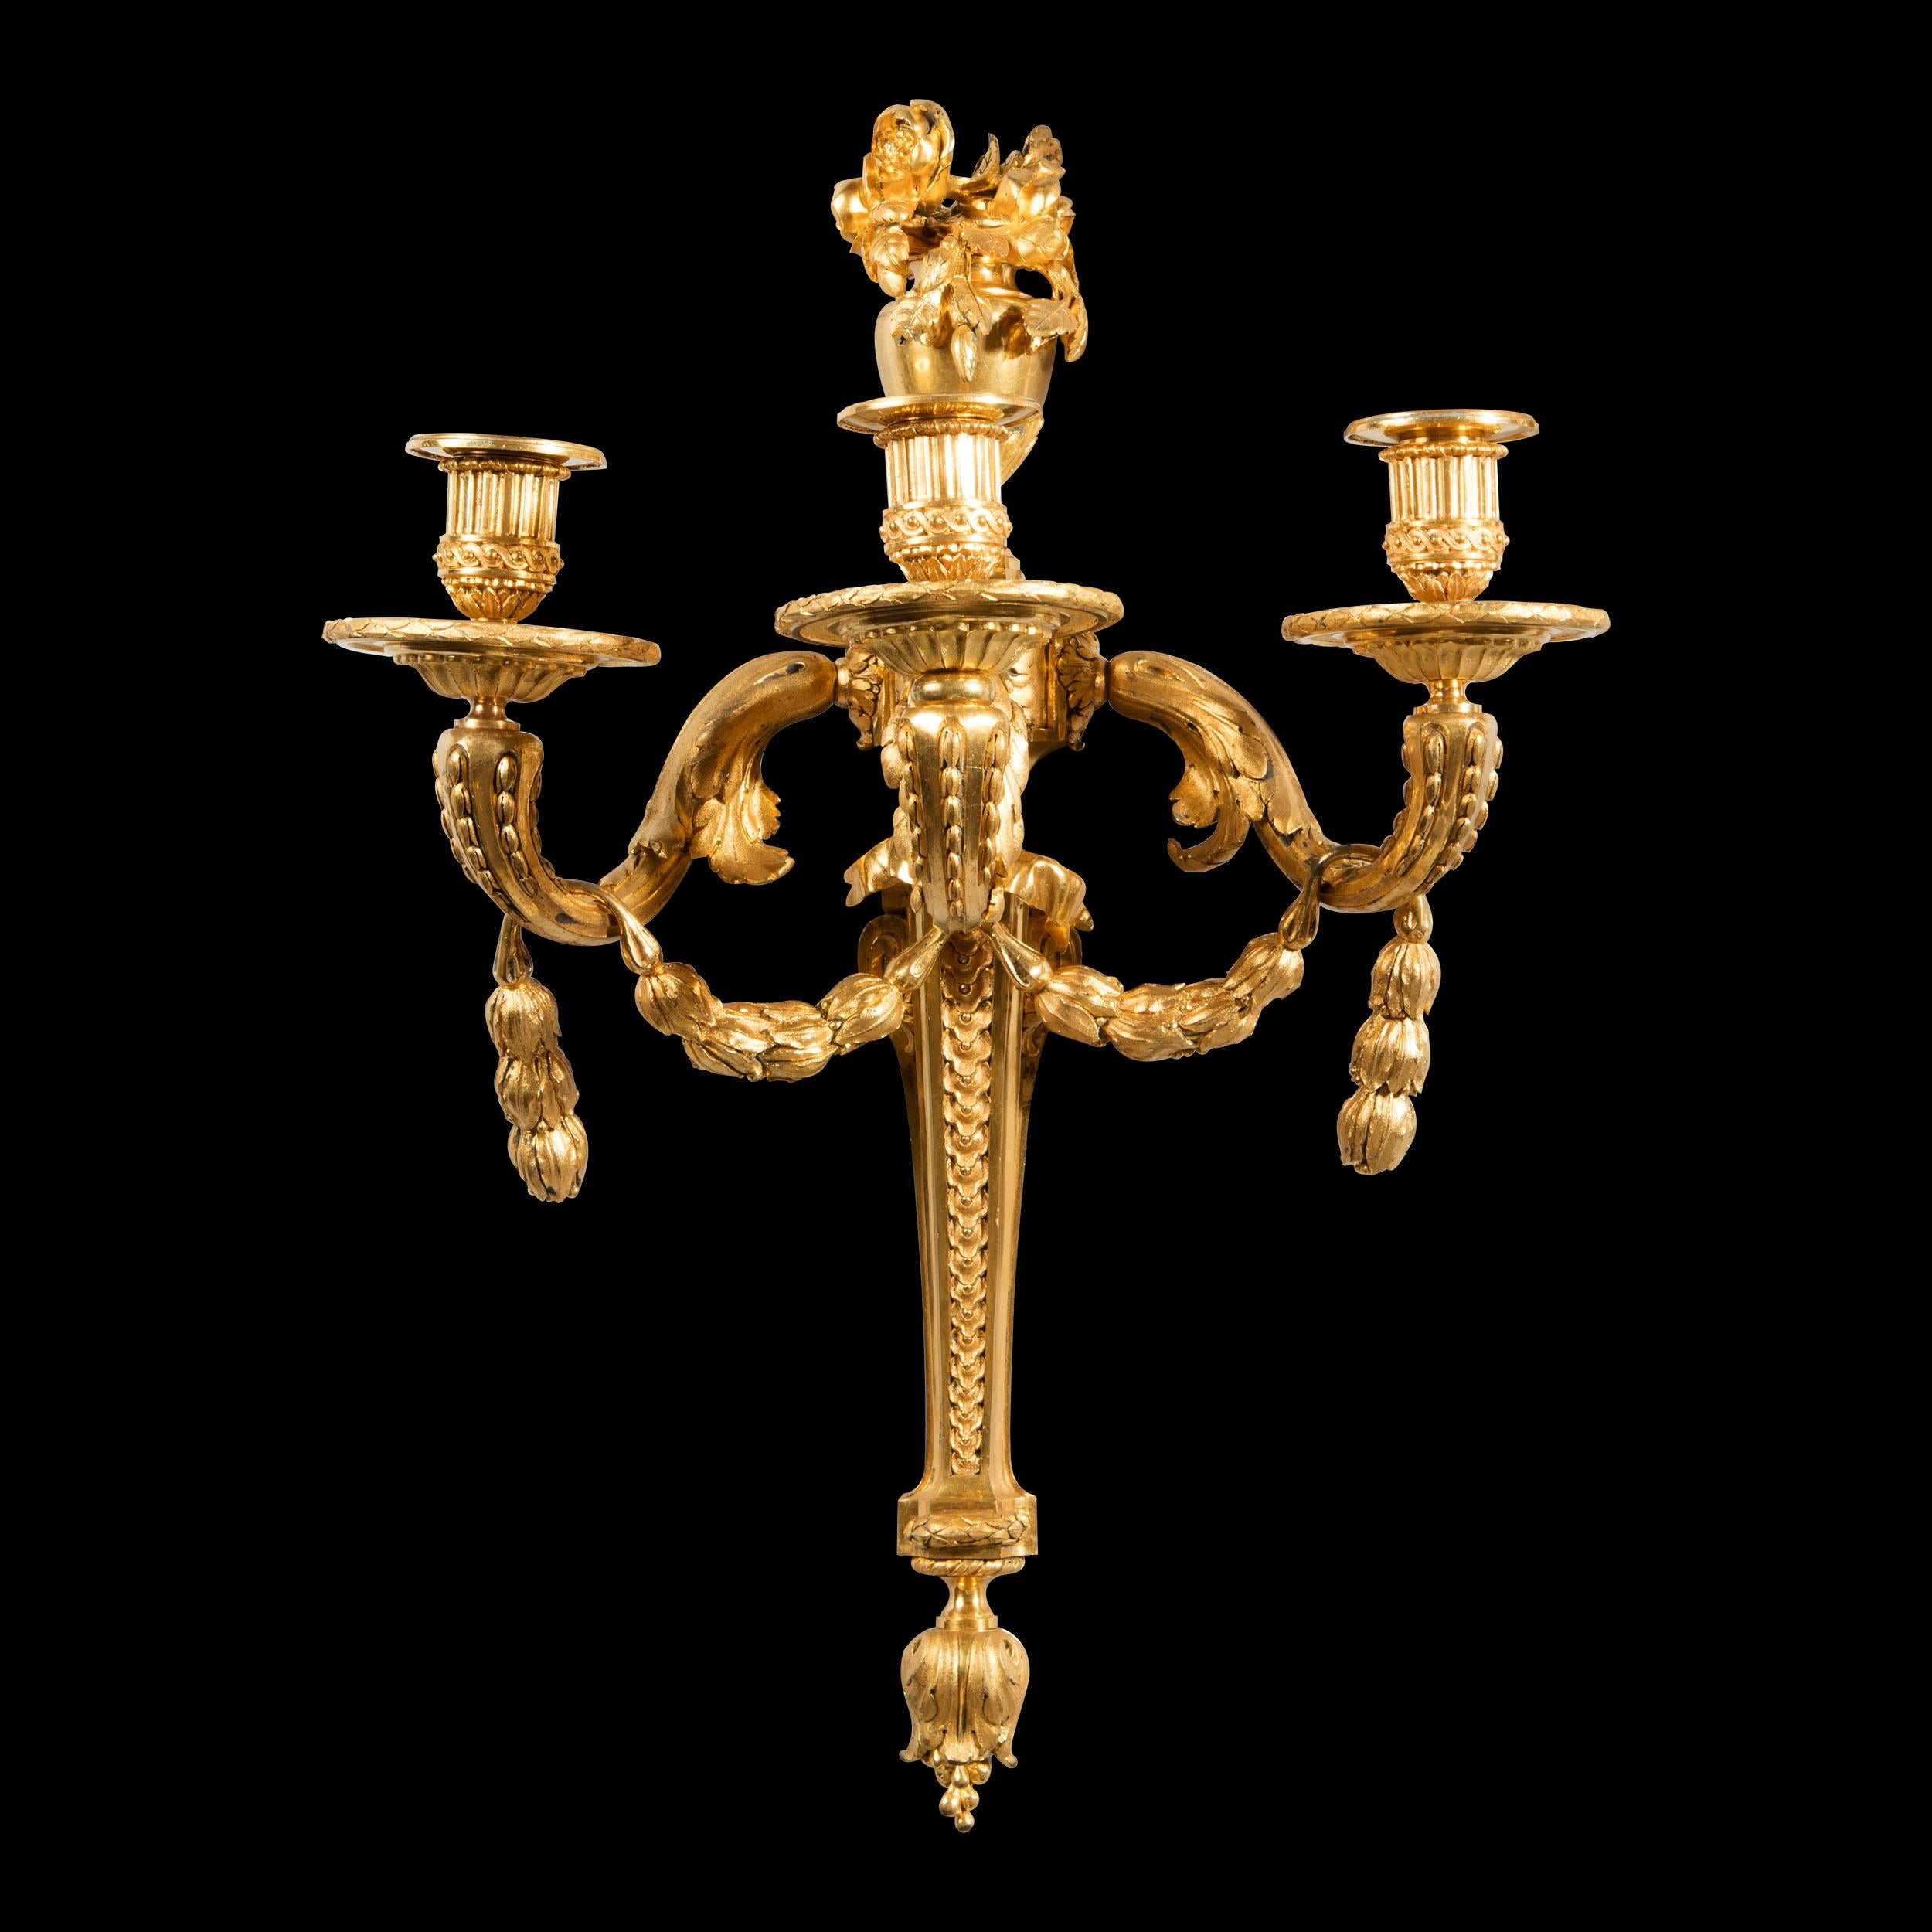 French Monumental Pair of Louis XVI Gilt Bronze Wall Sconces Jean-Charles Delafosse For Sale